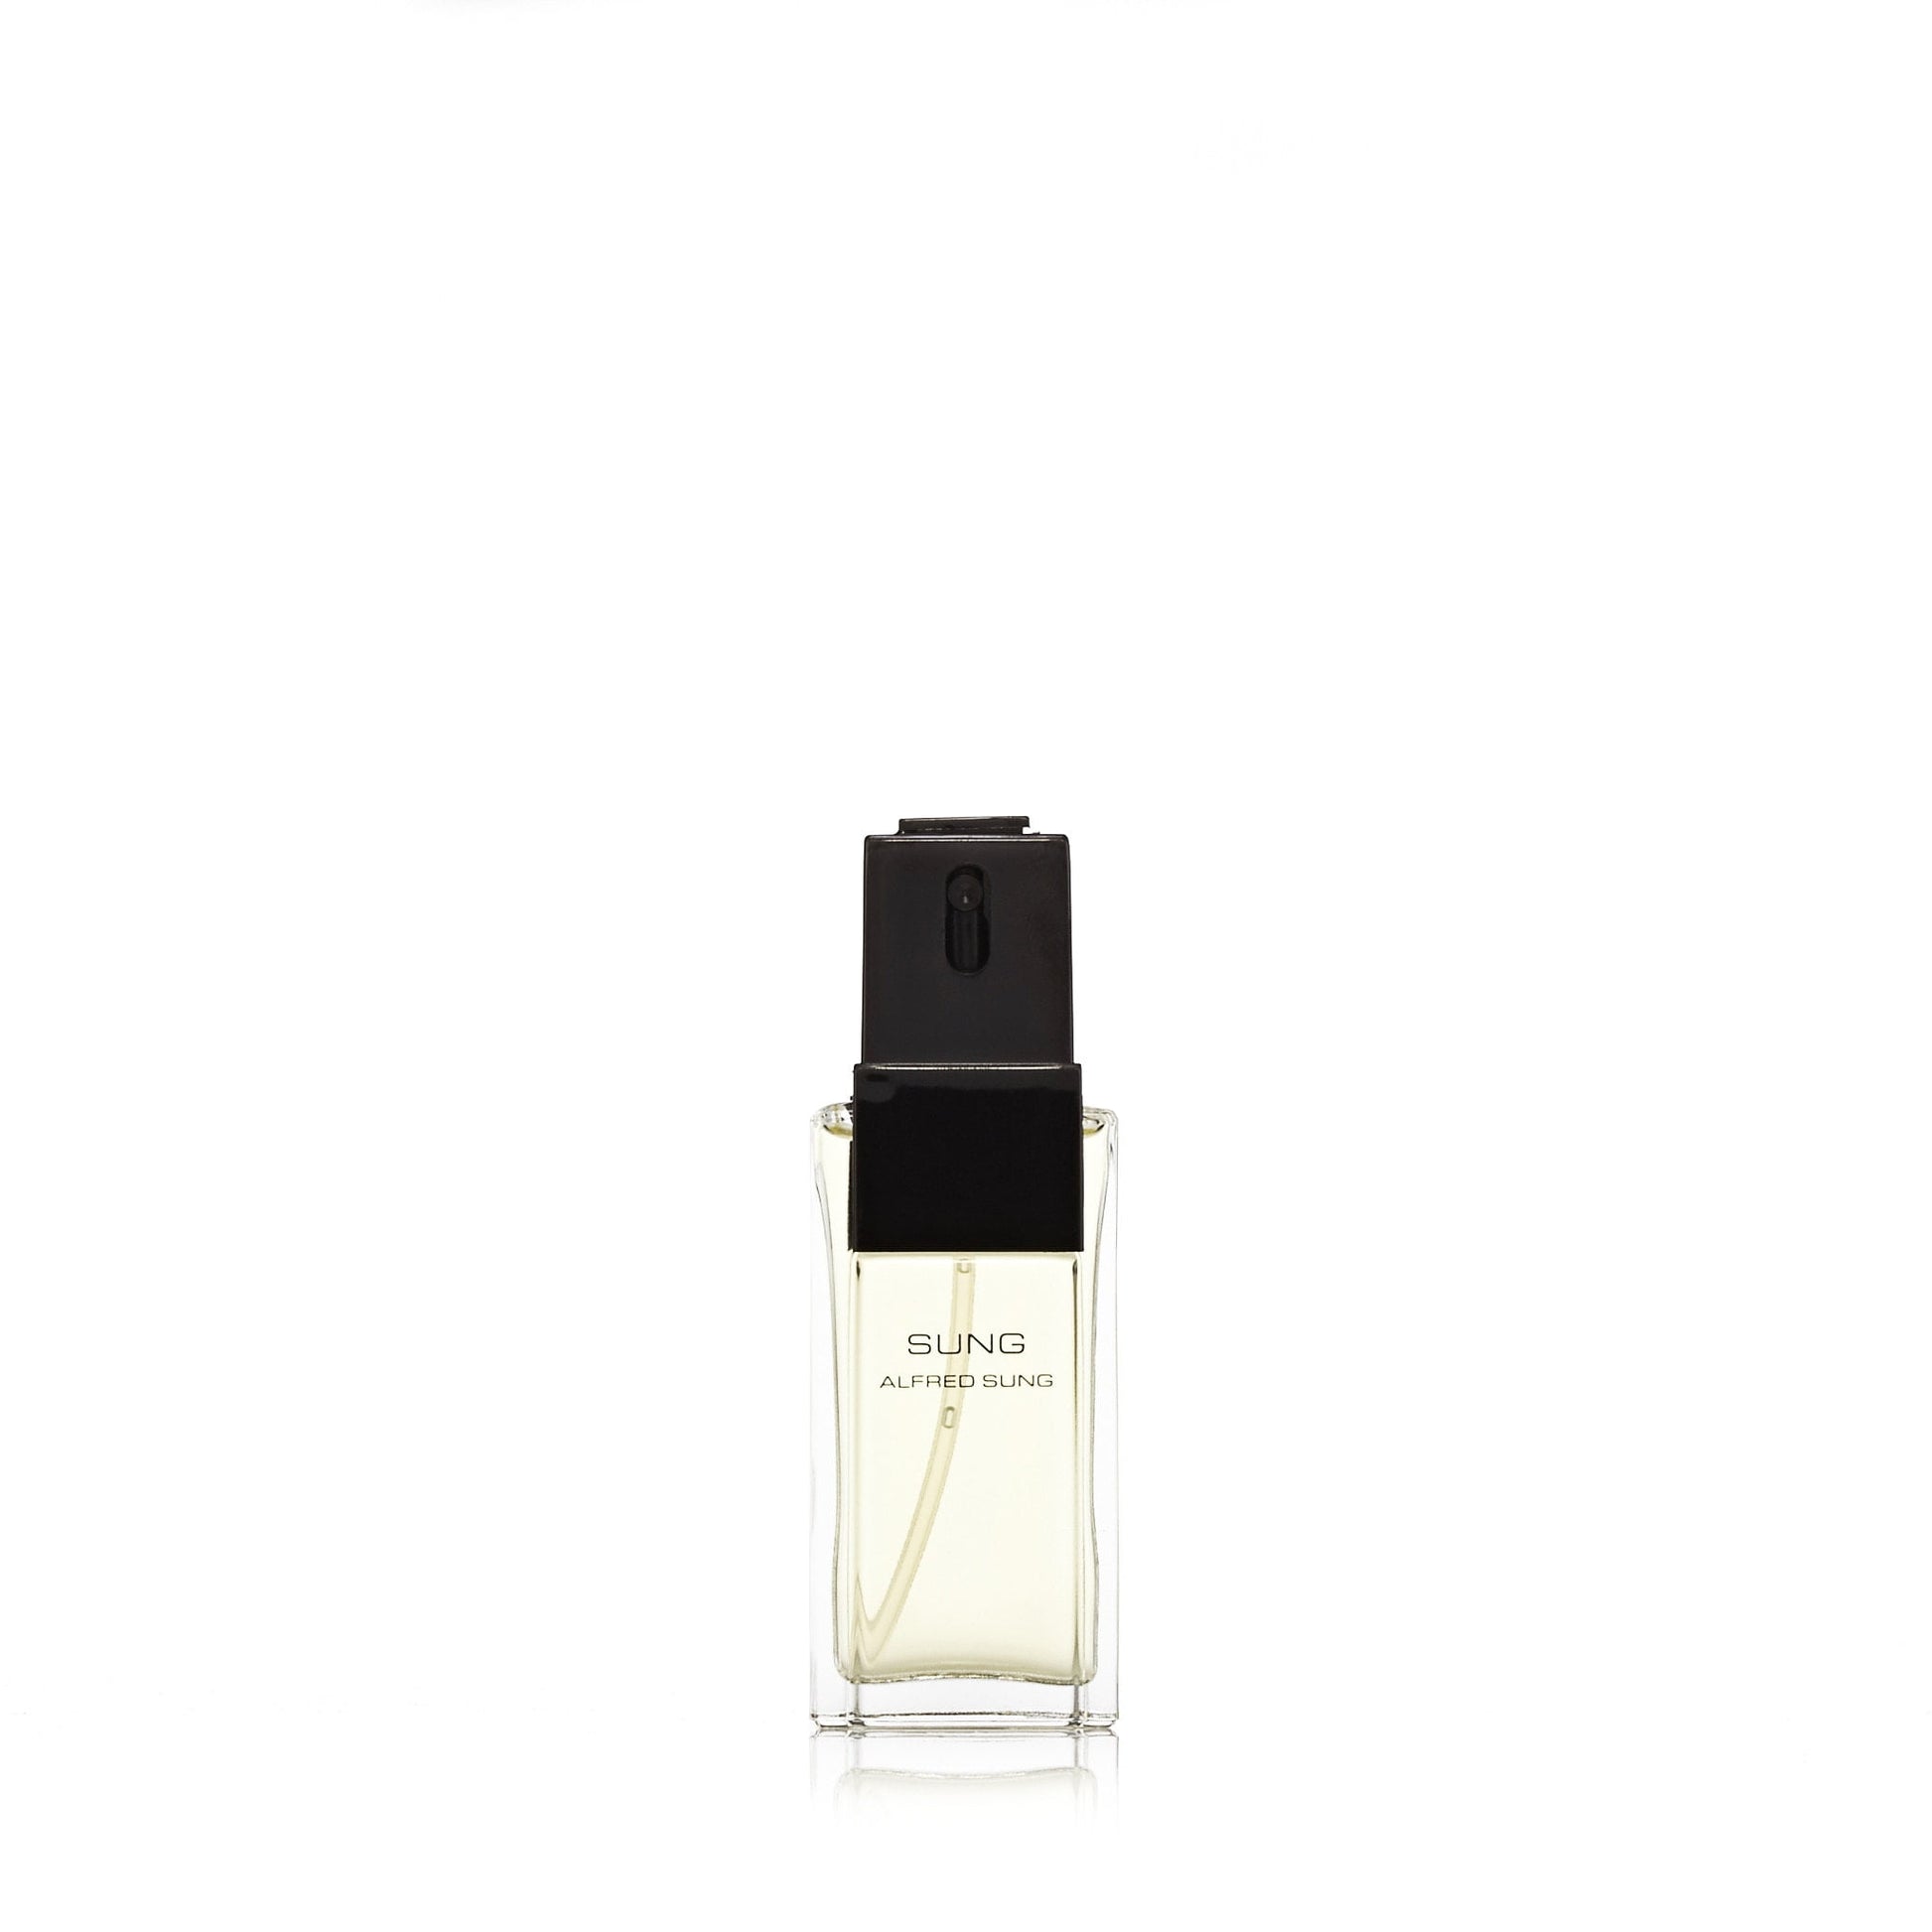 Alfred Sung Eau de Toilette Spray for Women by Alfred Sung, Product image 3